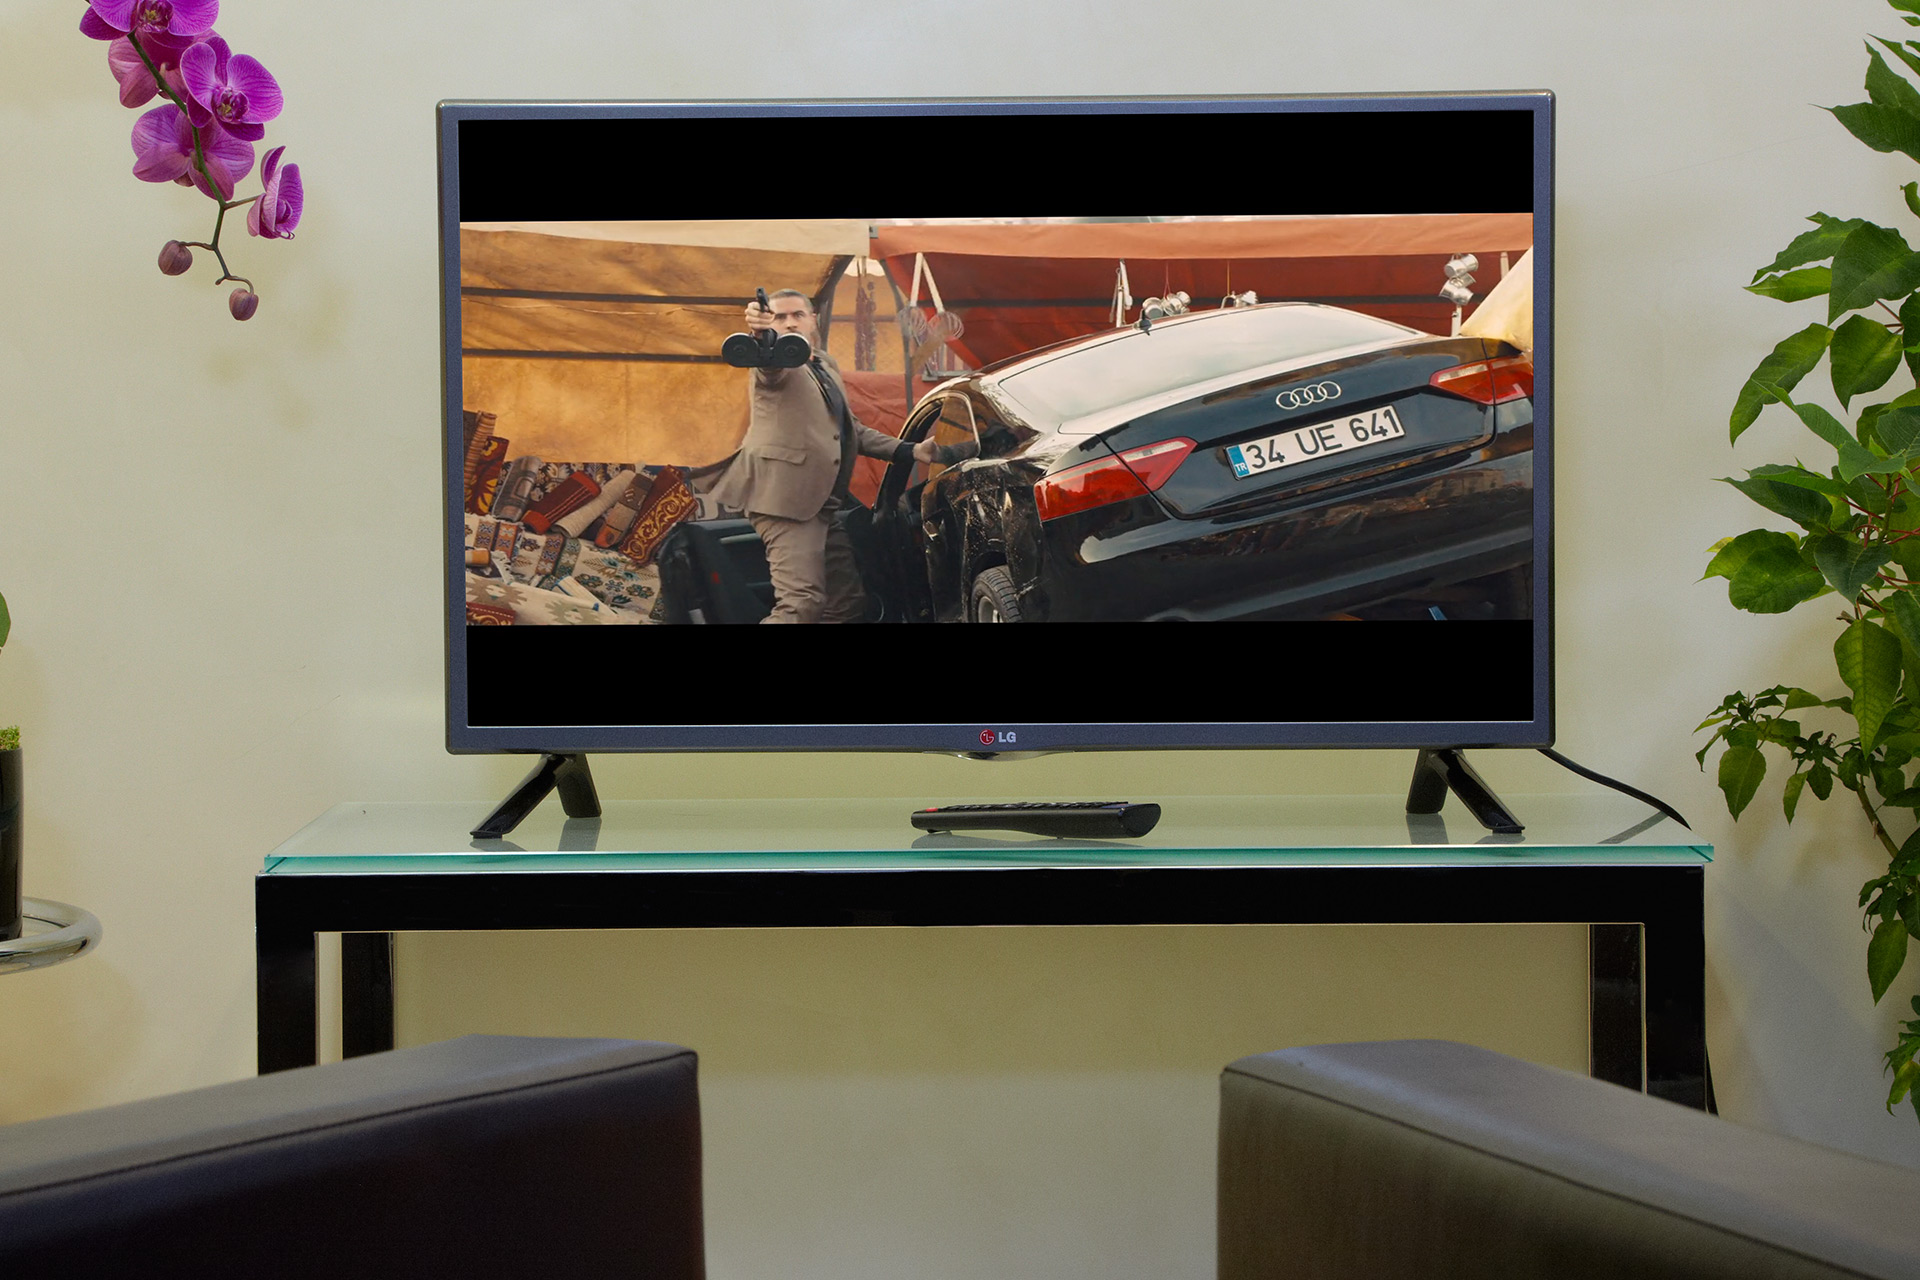 LG 32LB5600 32-inch TV Review | Tom's Guide